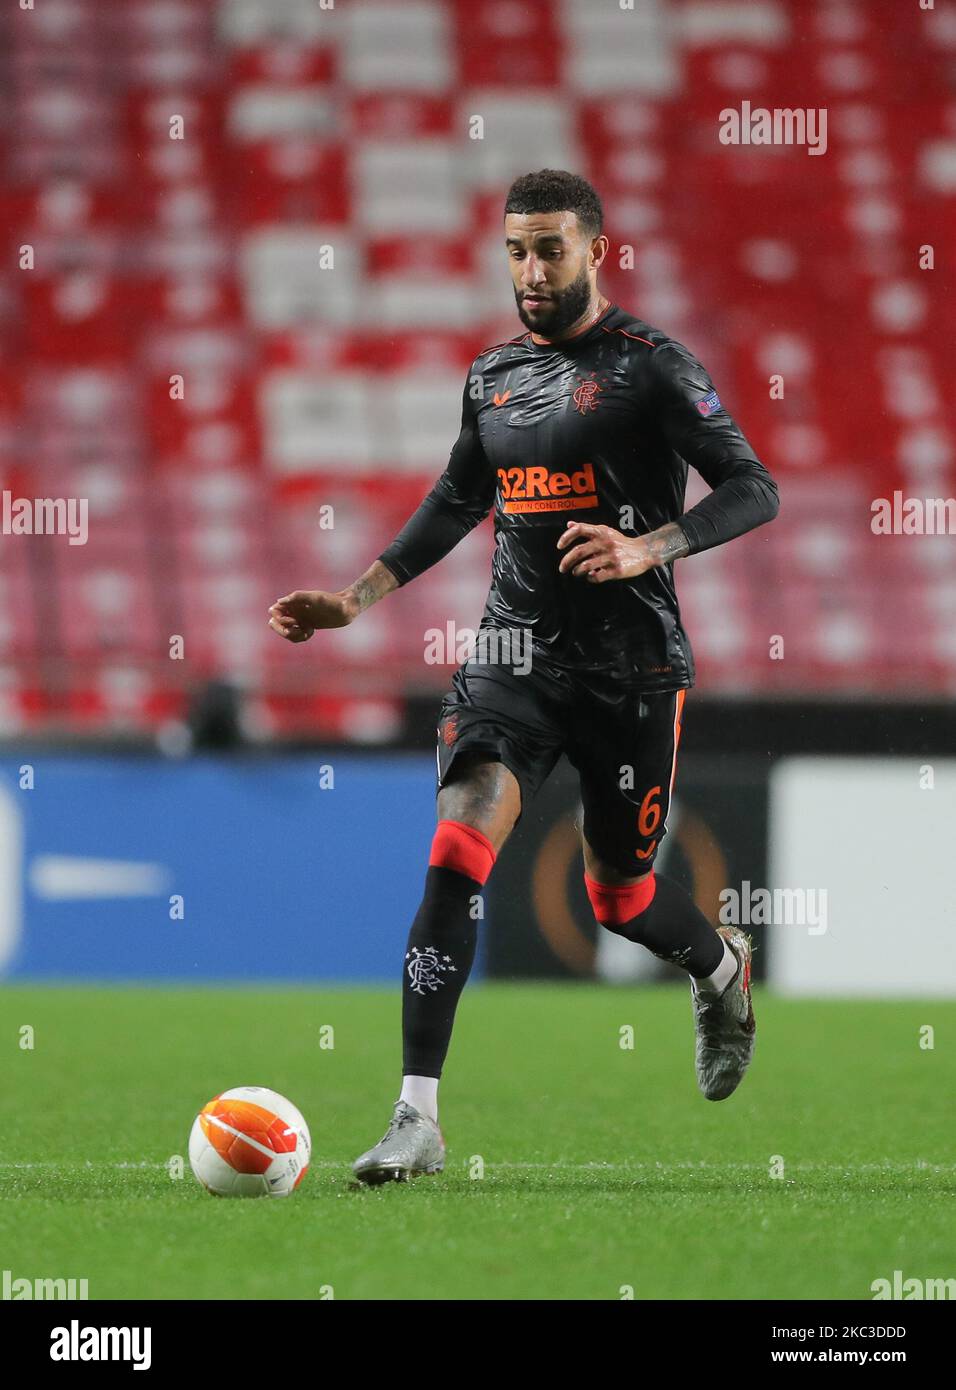 Connor Goldson of Rangers FC in action during the UEFA Europa League Group D stage match between SL Benfica and Rangers FC at Estadio da Luz on November 5, 2020 in Lisbon, Portugal. (Photo by Paulo Nascimento/NurPhoto) Stock Photo